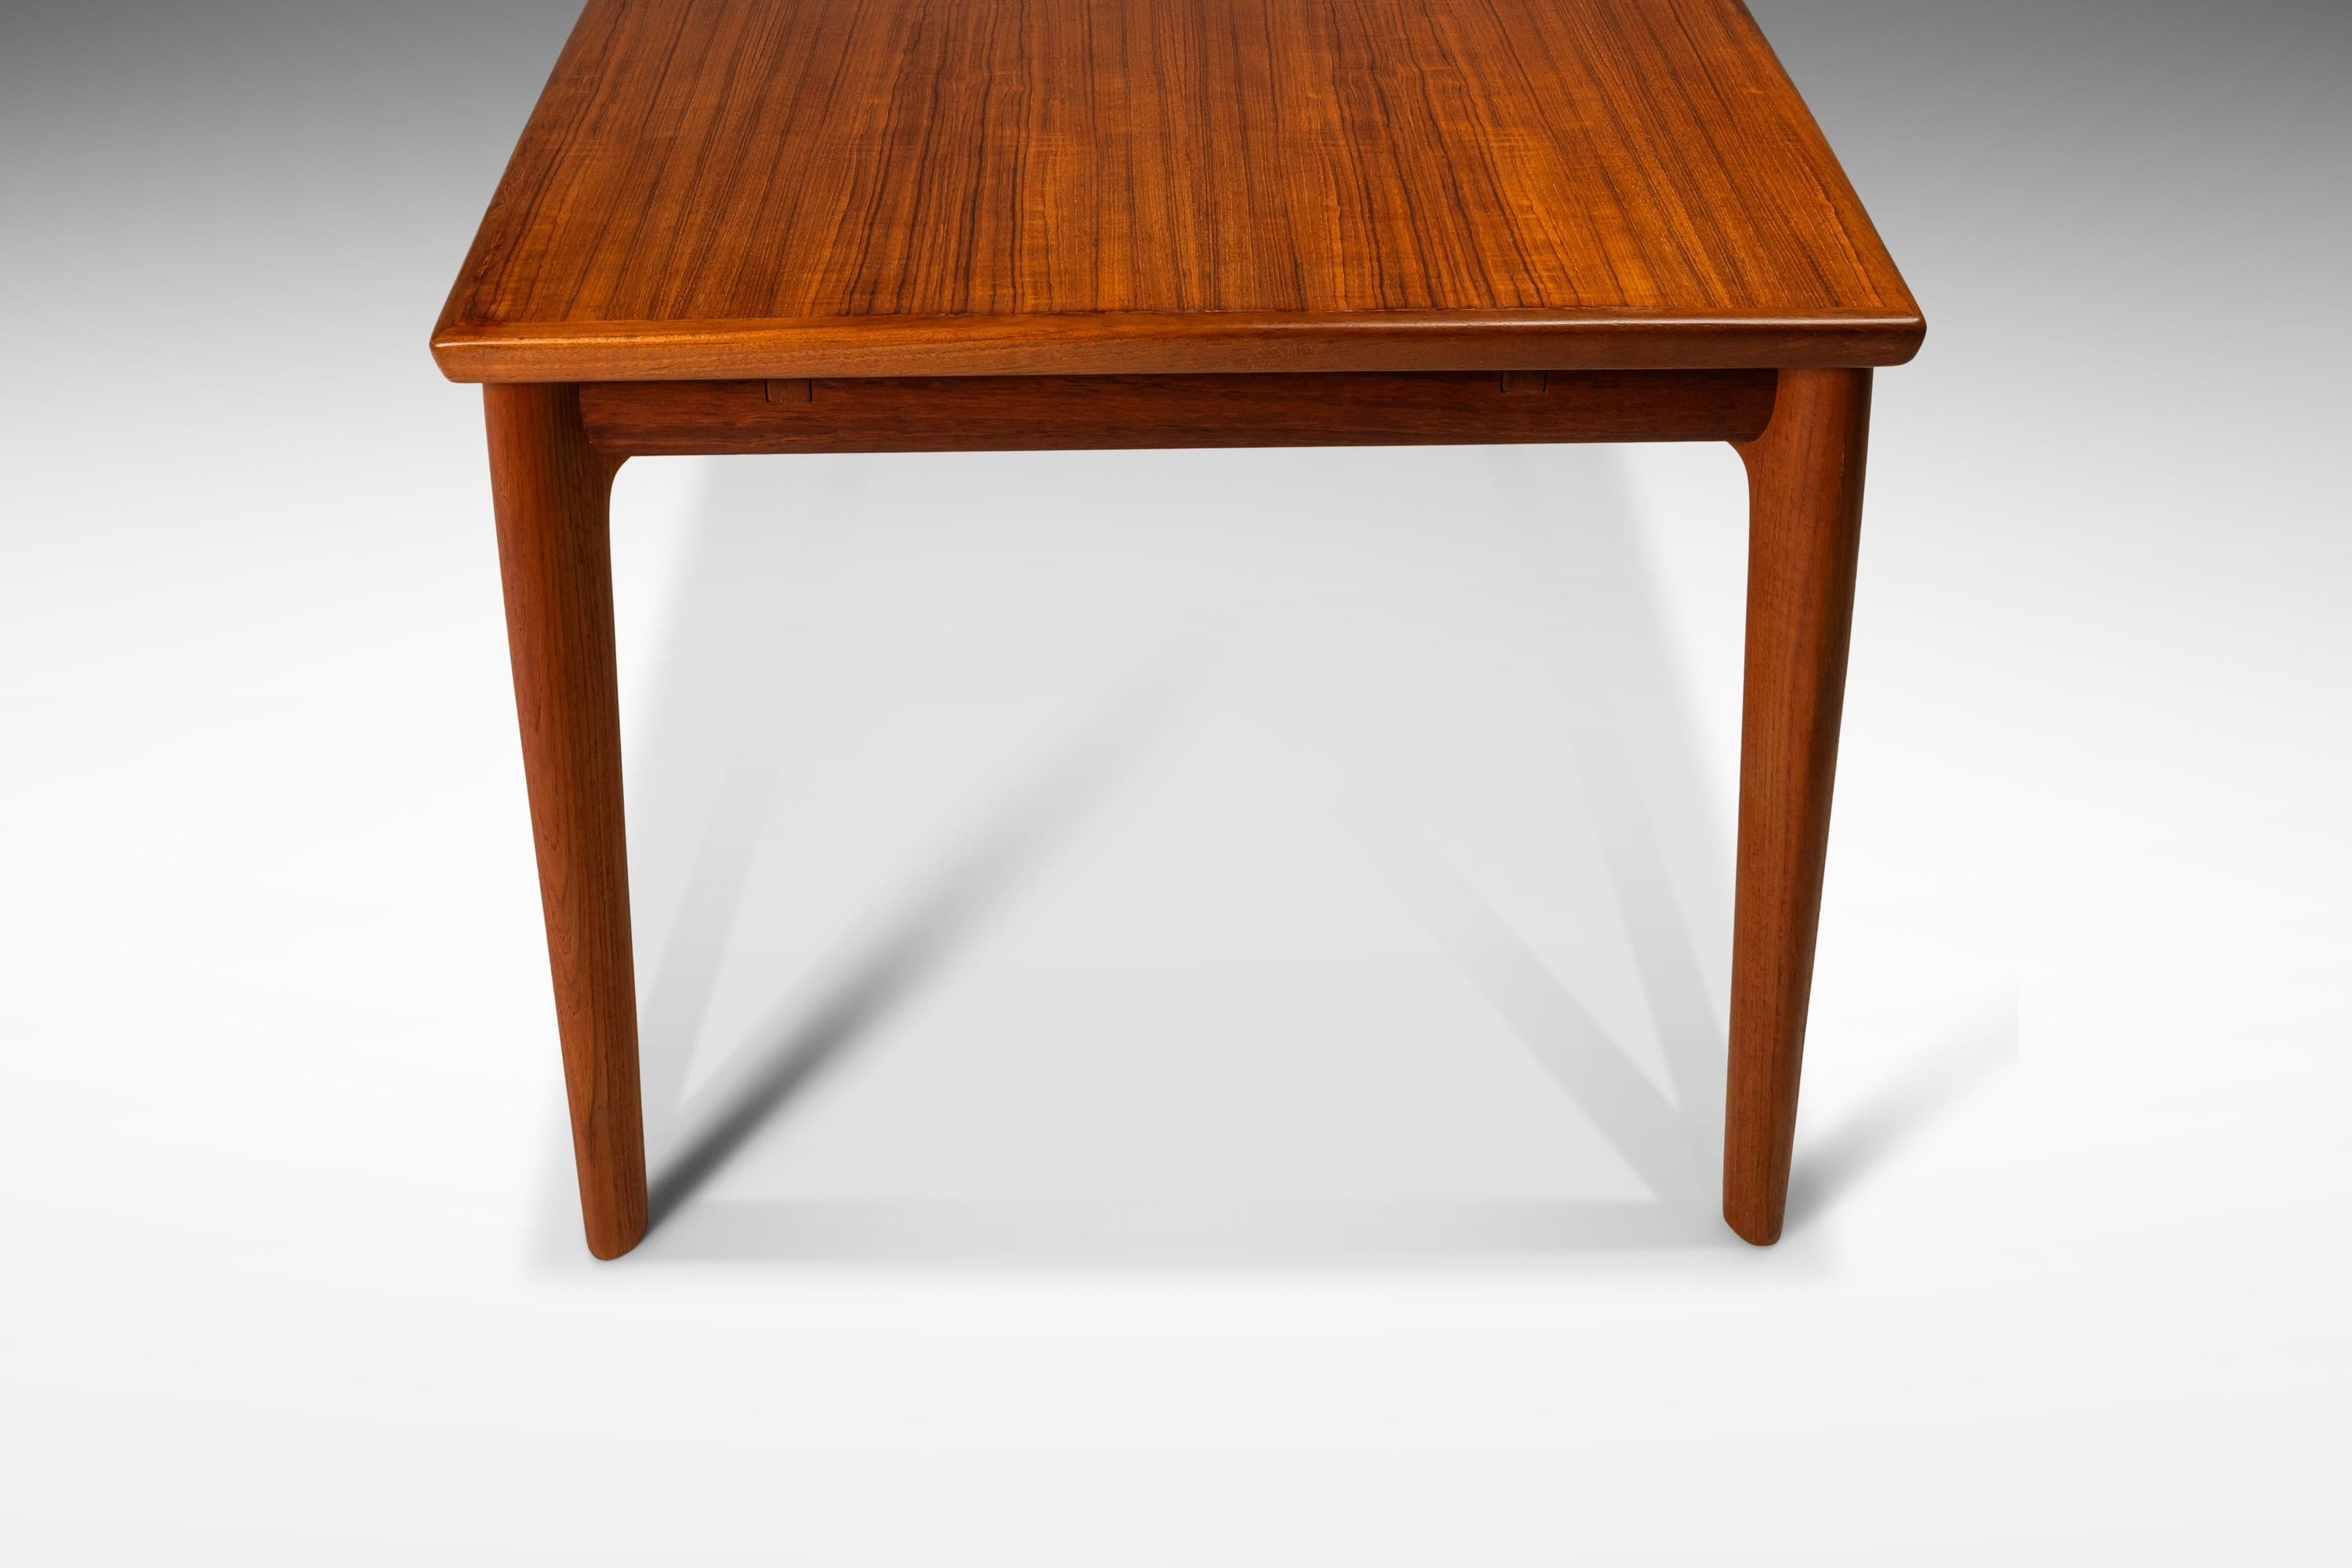 Danish Modern Expansion Dining Table in Teak w/ Stow-in-Table Leaves, c. 1960s For Sale 7